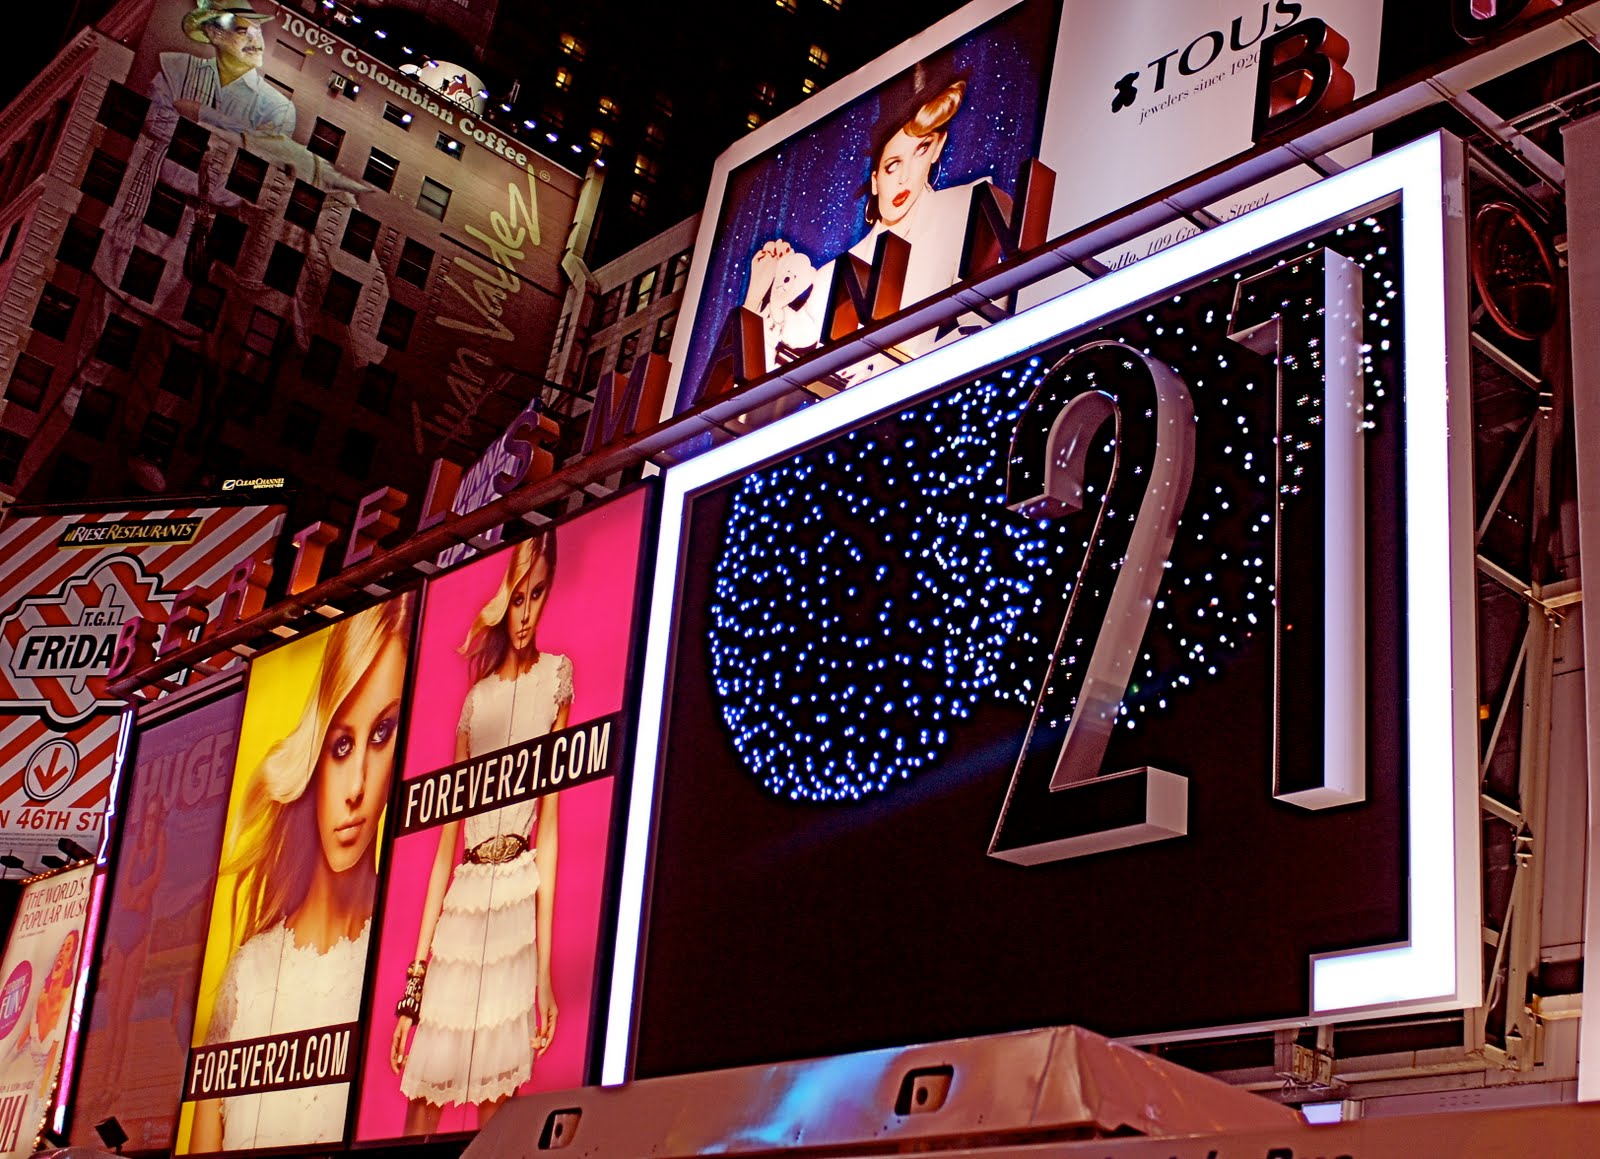 Photographing Billboards : Forever 21 Times Square Billboard